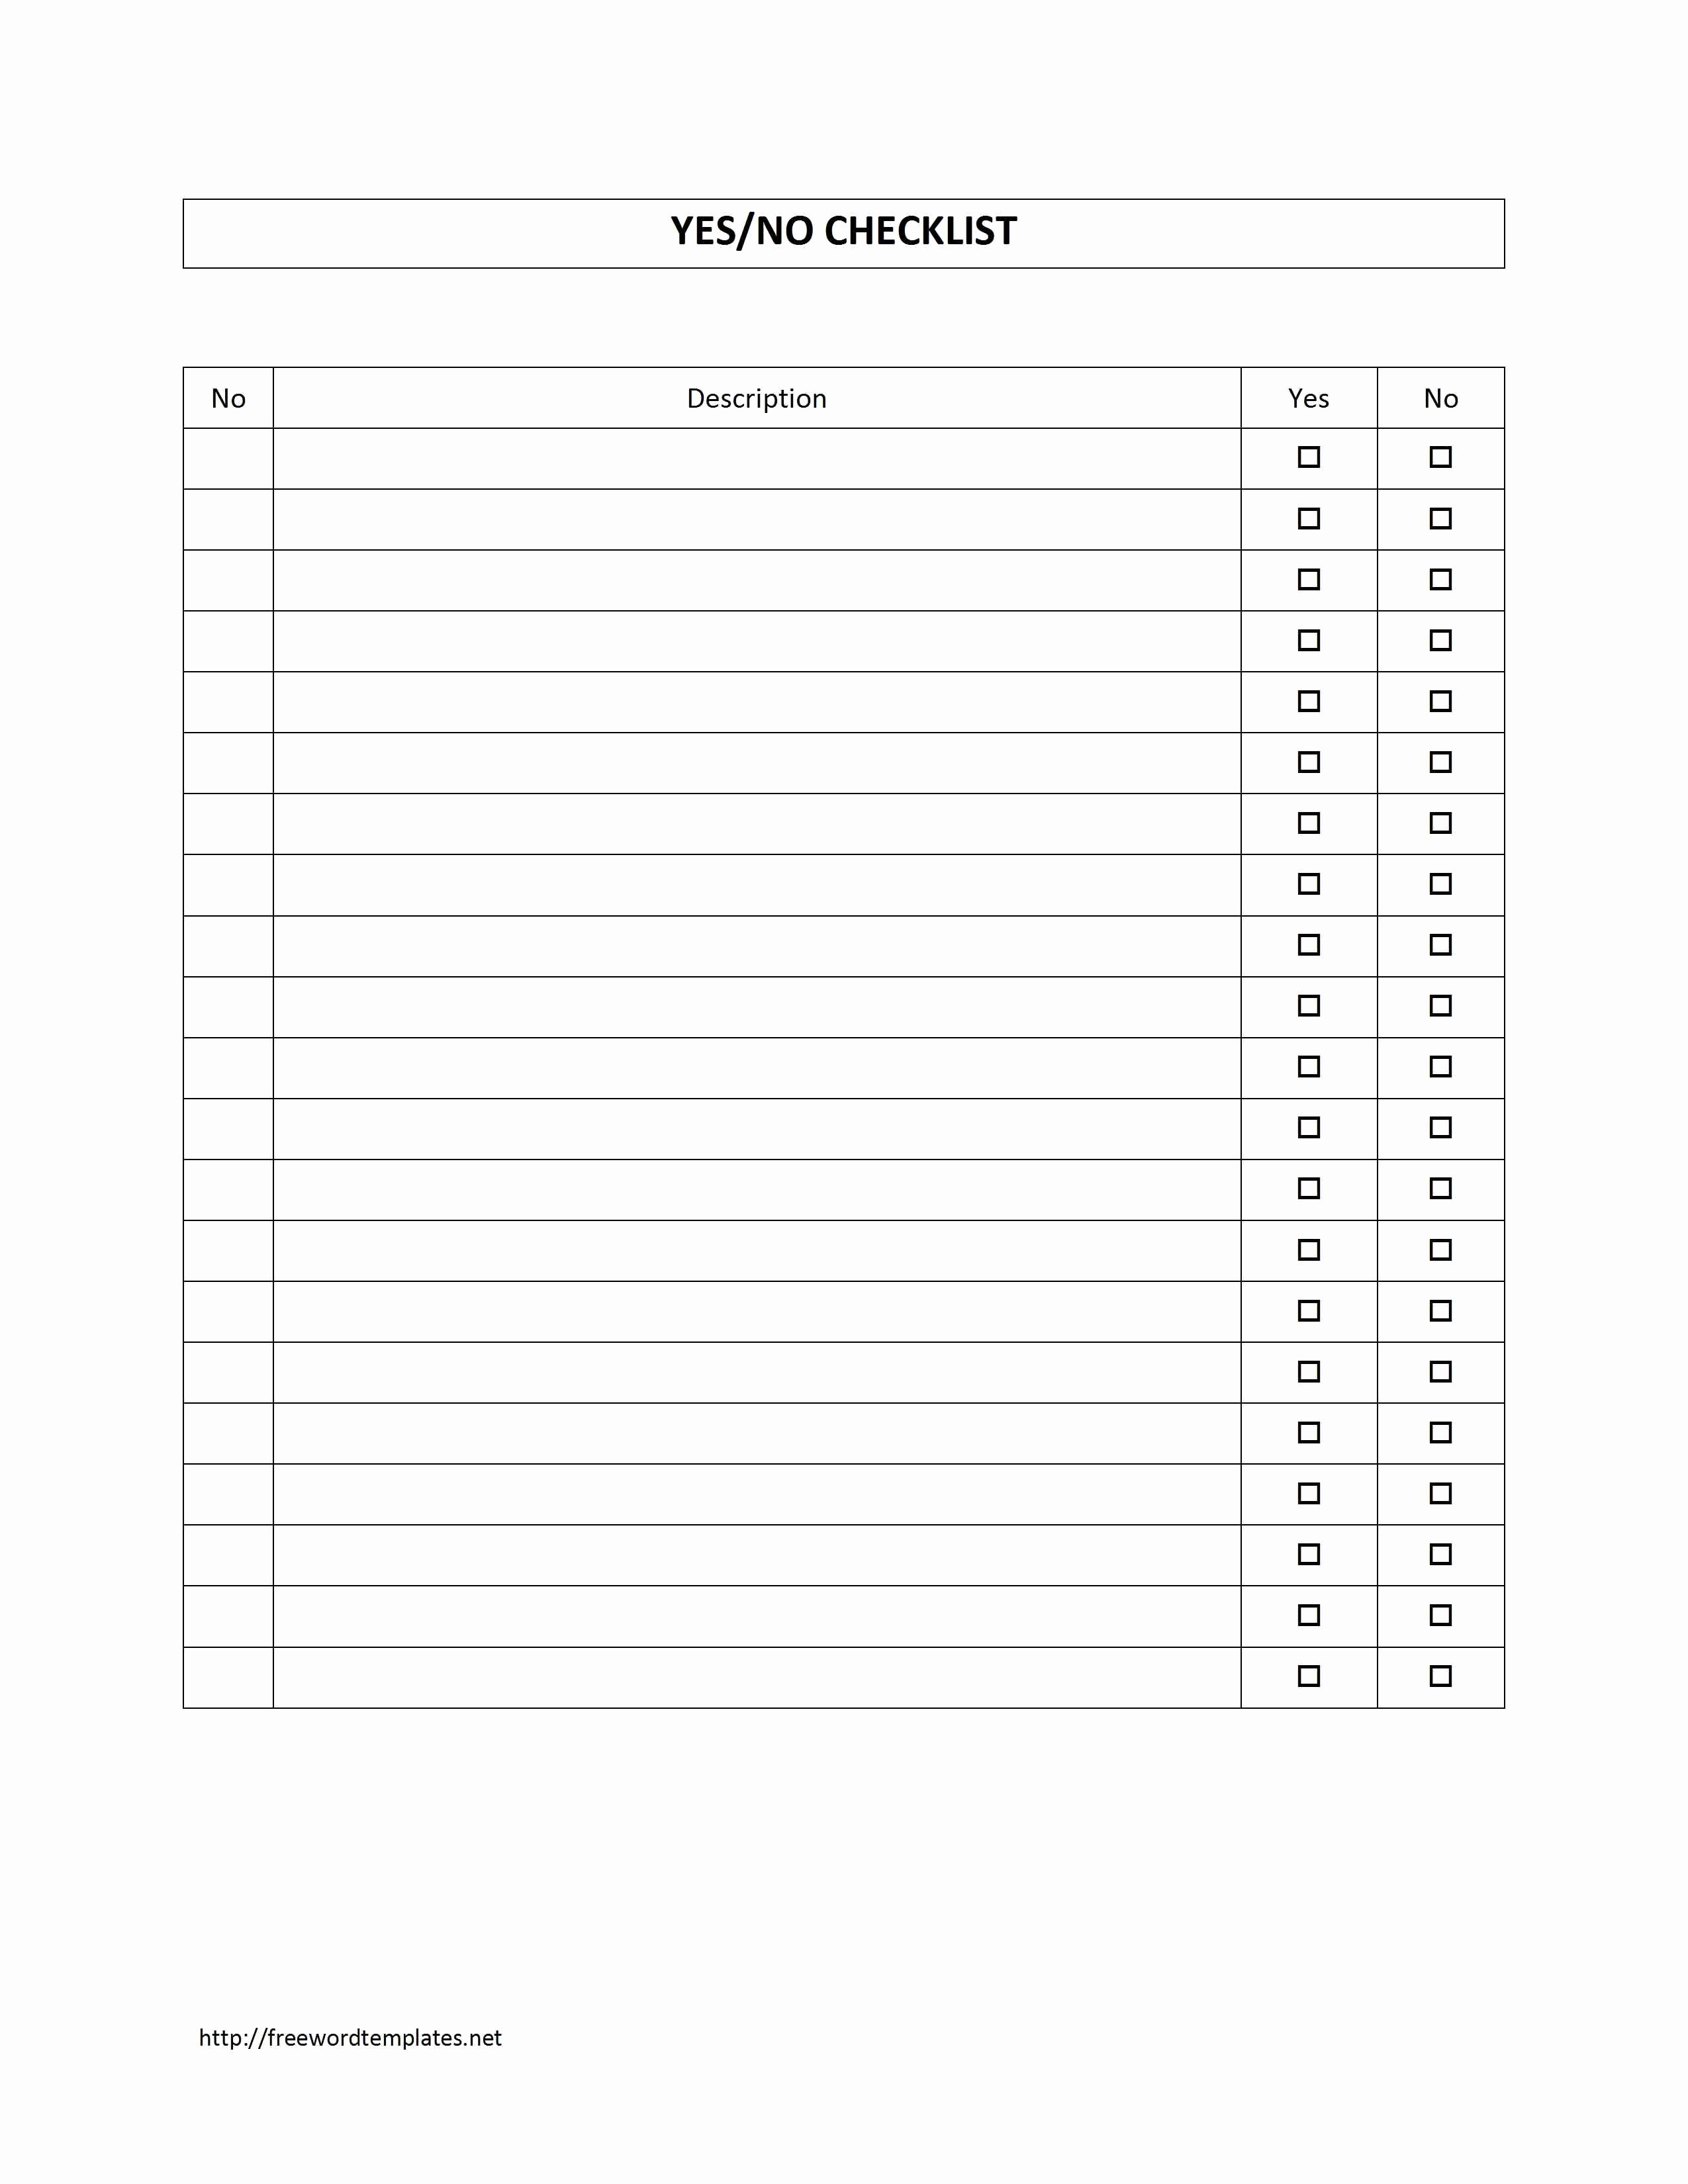 Blank Checklist Template Word Lovely Yes No Checklist